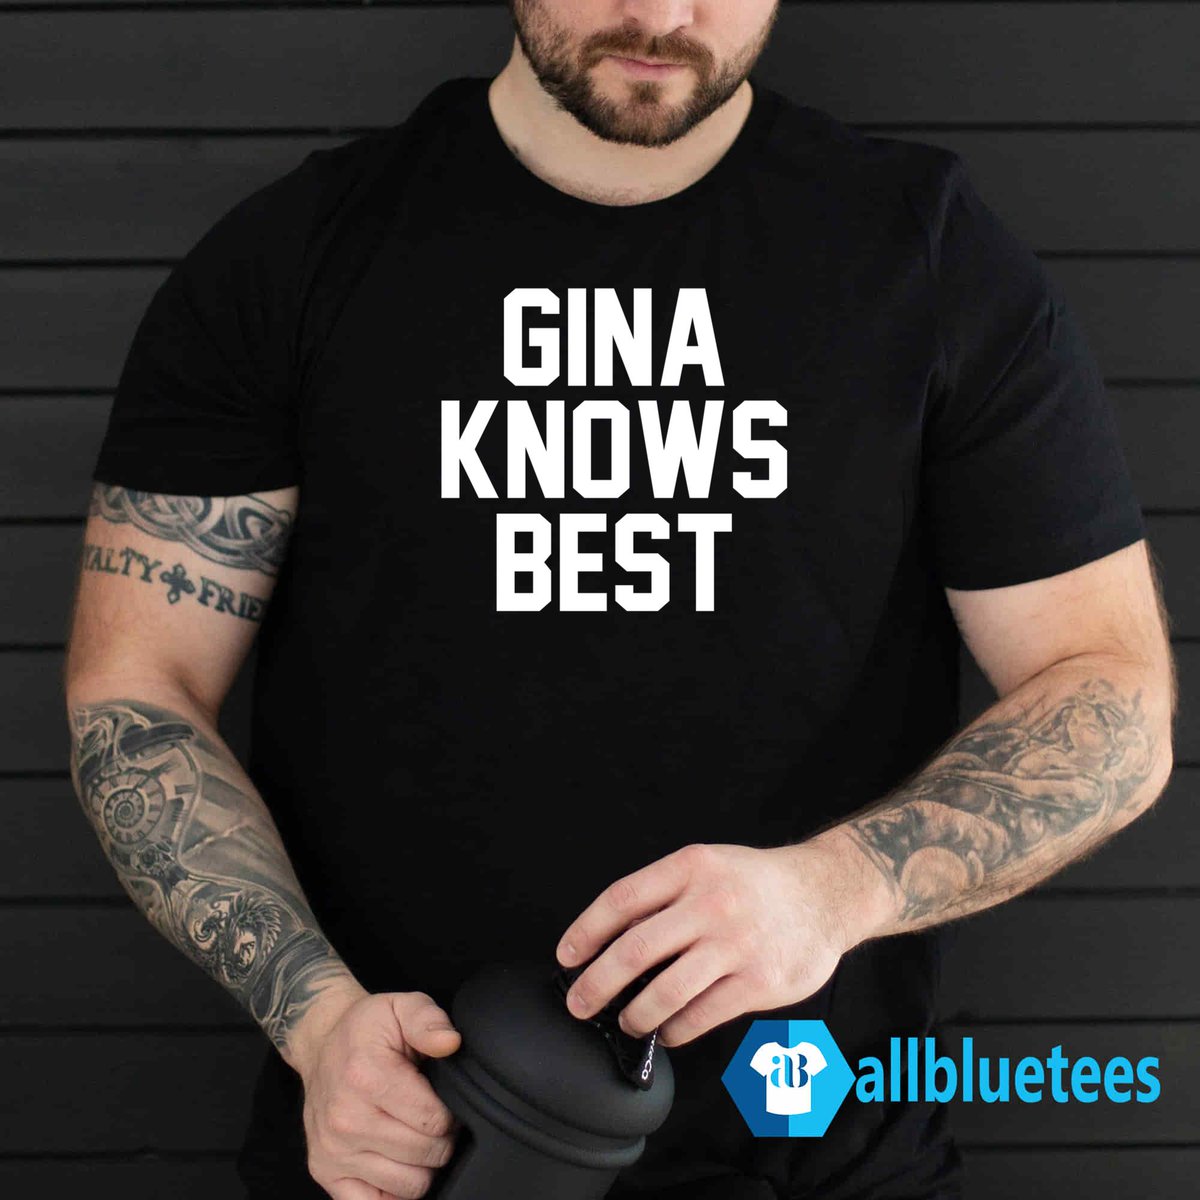 💖 Make a statement with the Gina Knows Best – because who wouldn't want a daily dose of Gina's wisdom and flair? 🌈✨ Grab yours now and join the fashion revolution led by the queen of style advice! 👑👕
allbluetees.com/product/gina-k…